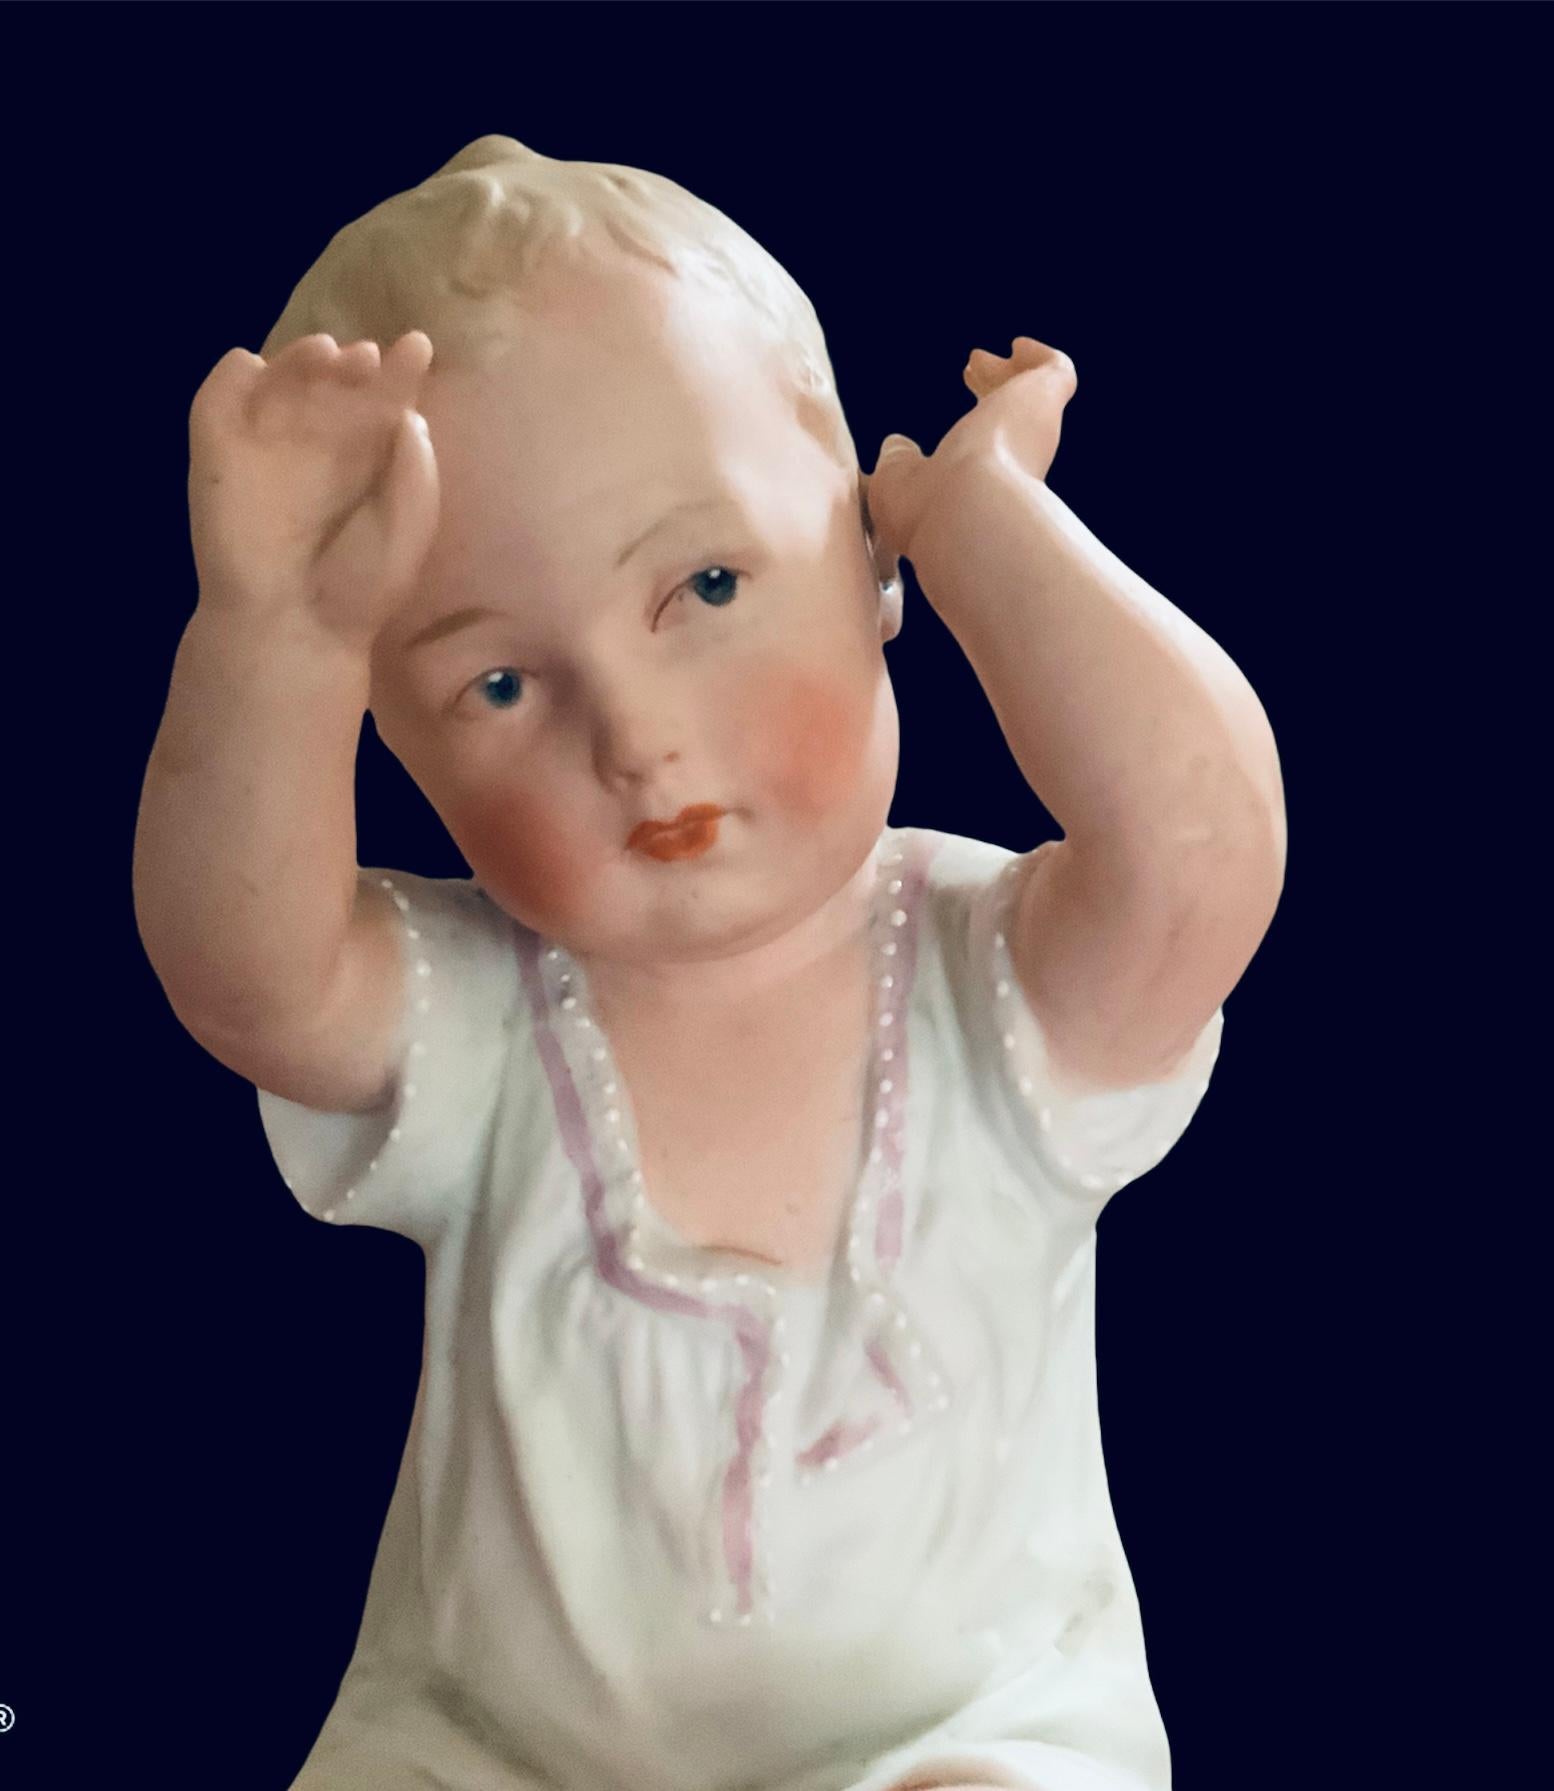 This is a bisque porcelain piano baby girl figurine. She is seated crossing her legs with her arms up and wearing a delicate white chemise with pearly buttons and pink ribbons. Her hair is curly blonde, her cheeks are pinky and her eyes are blue. A